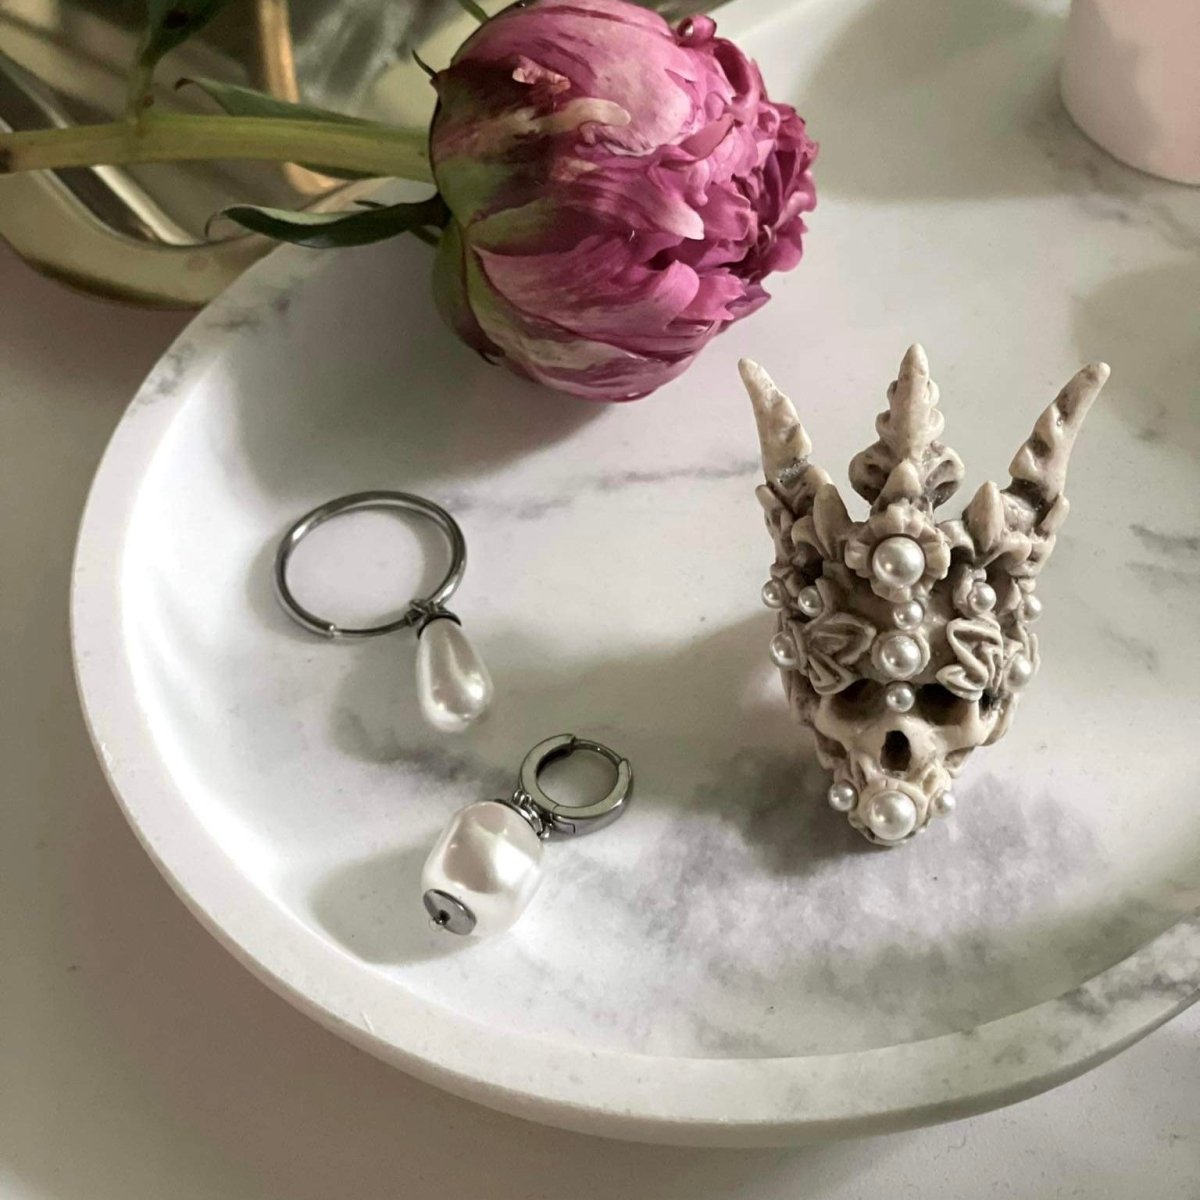 CORAL CROWN RING - Macabre Gadgets Store